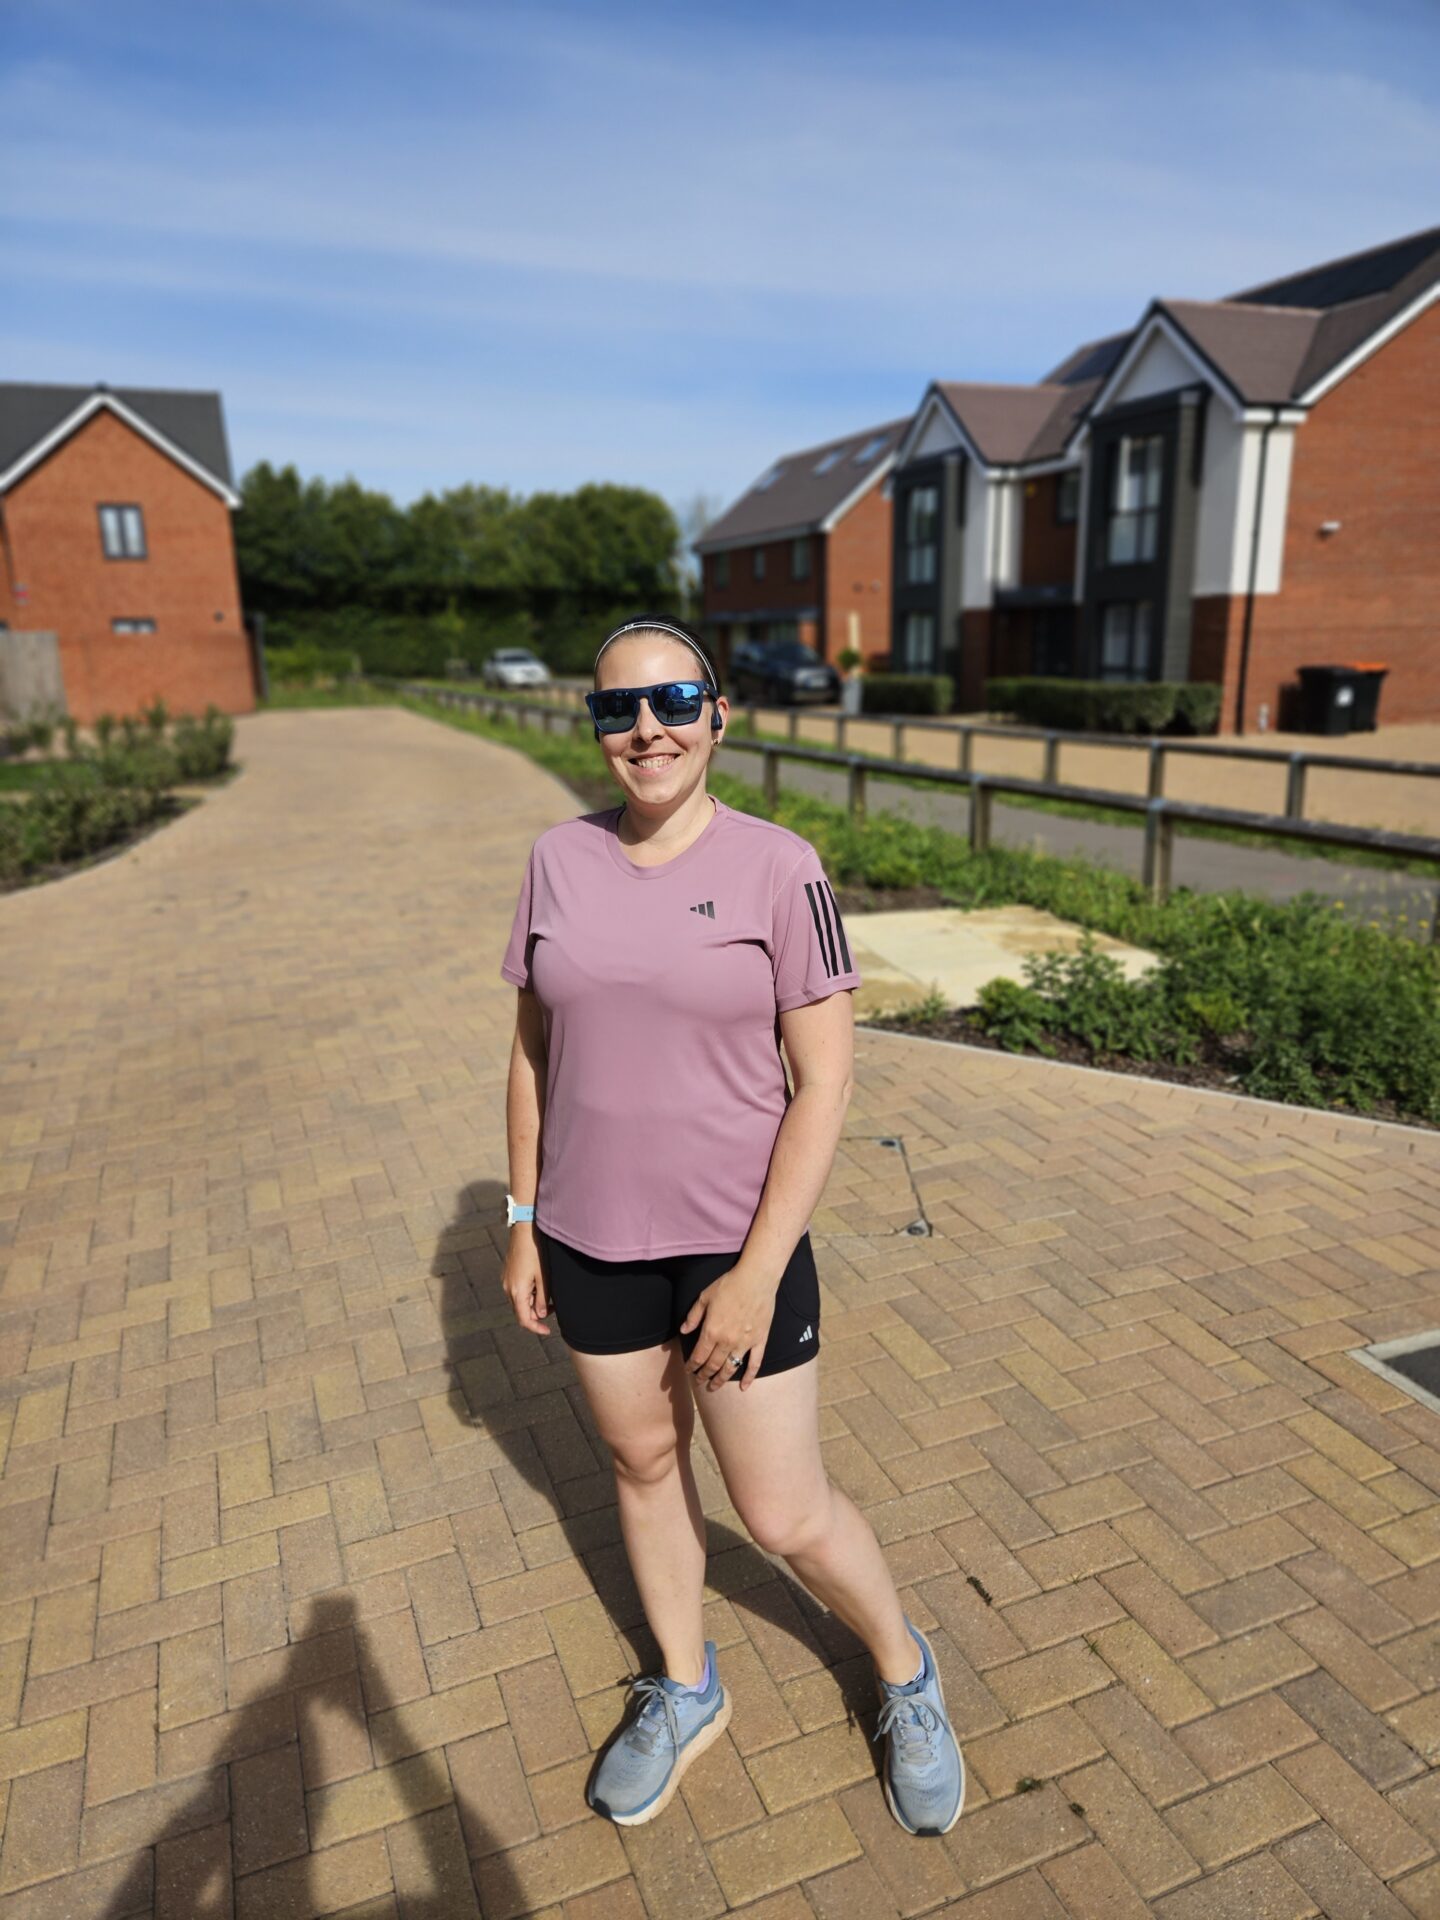 Woman in purple running top and black shorts stands on a block paved driveway in front of houses